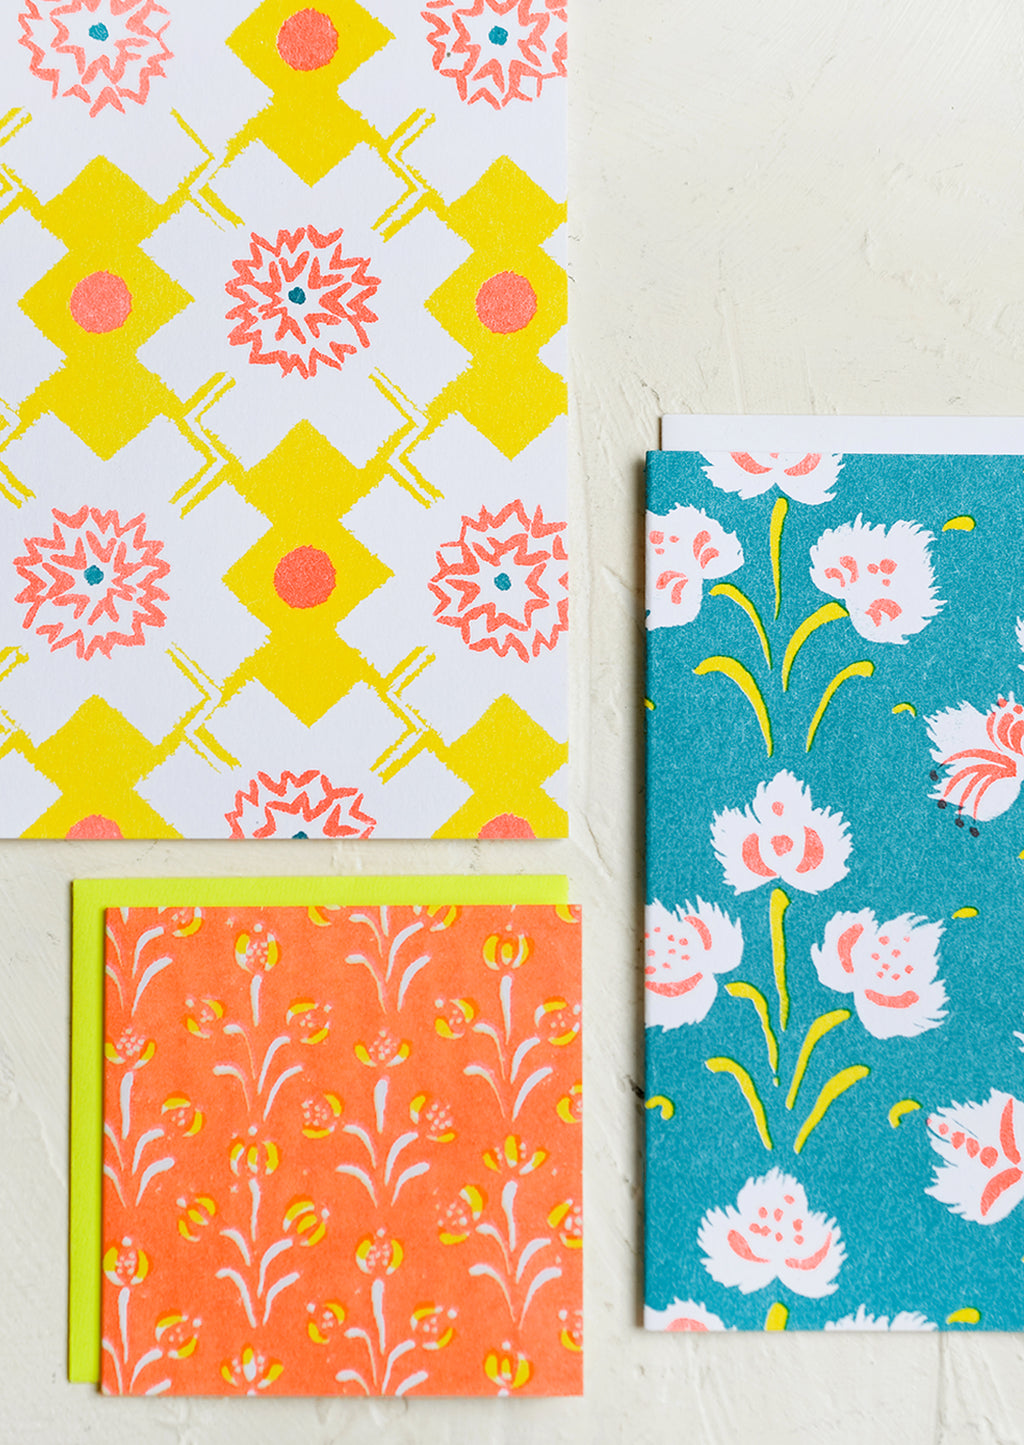 7: A patterned risograph printed card set in yellow, teal and orange.